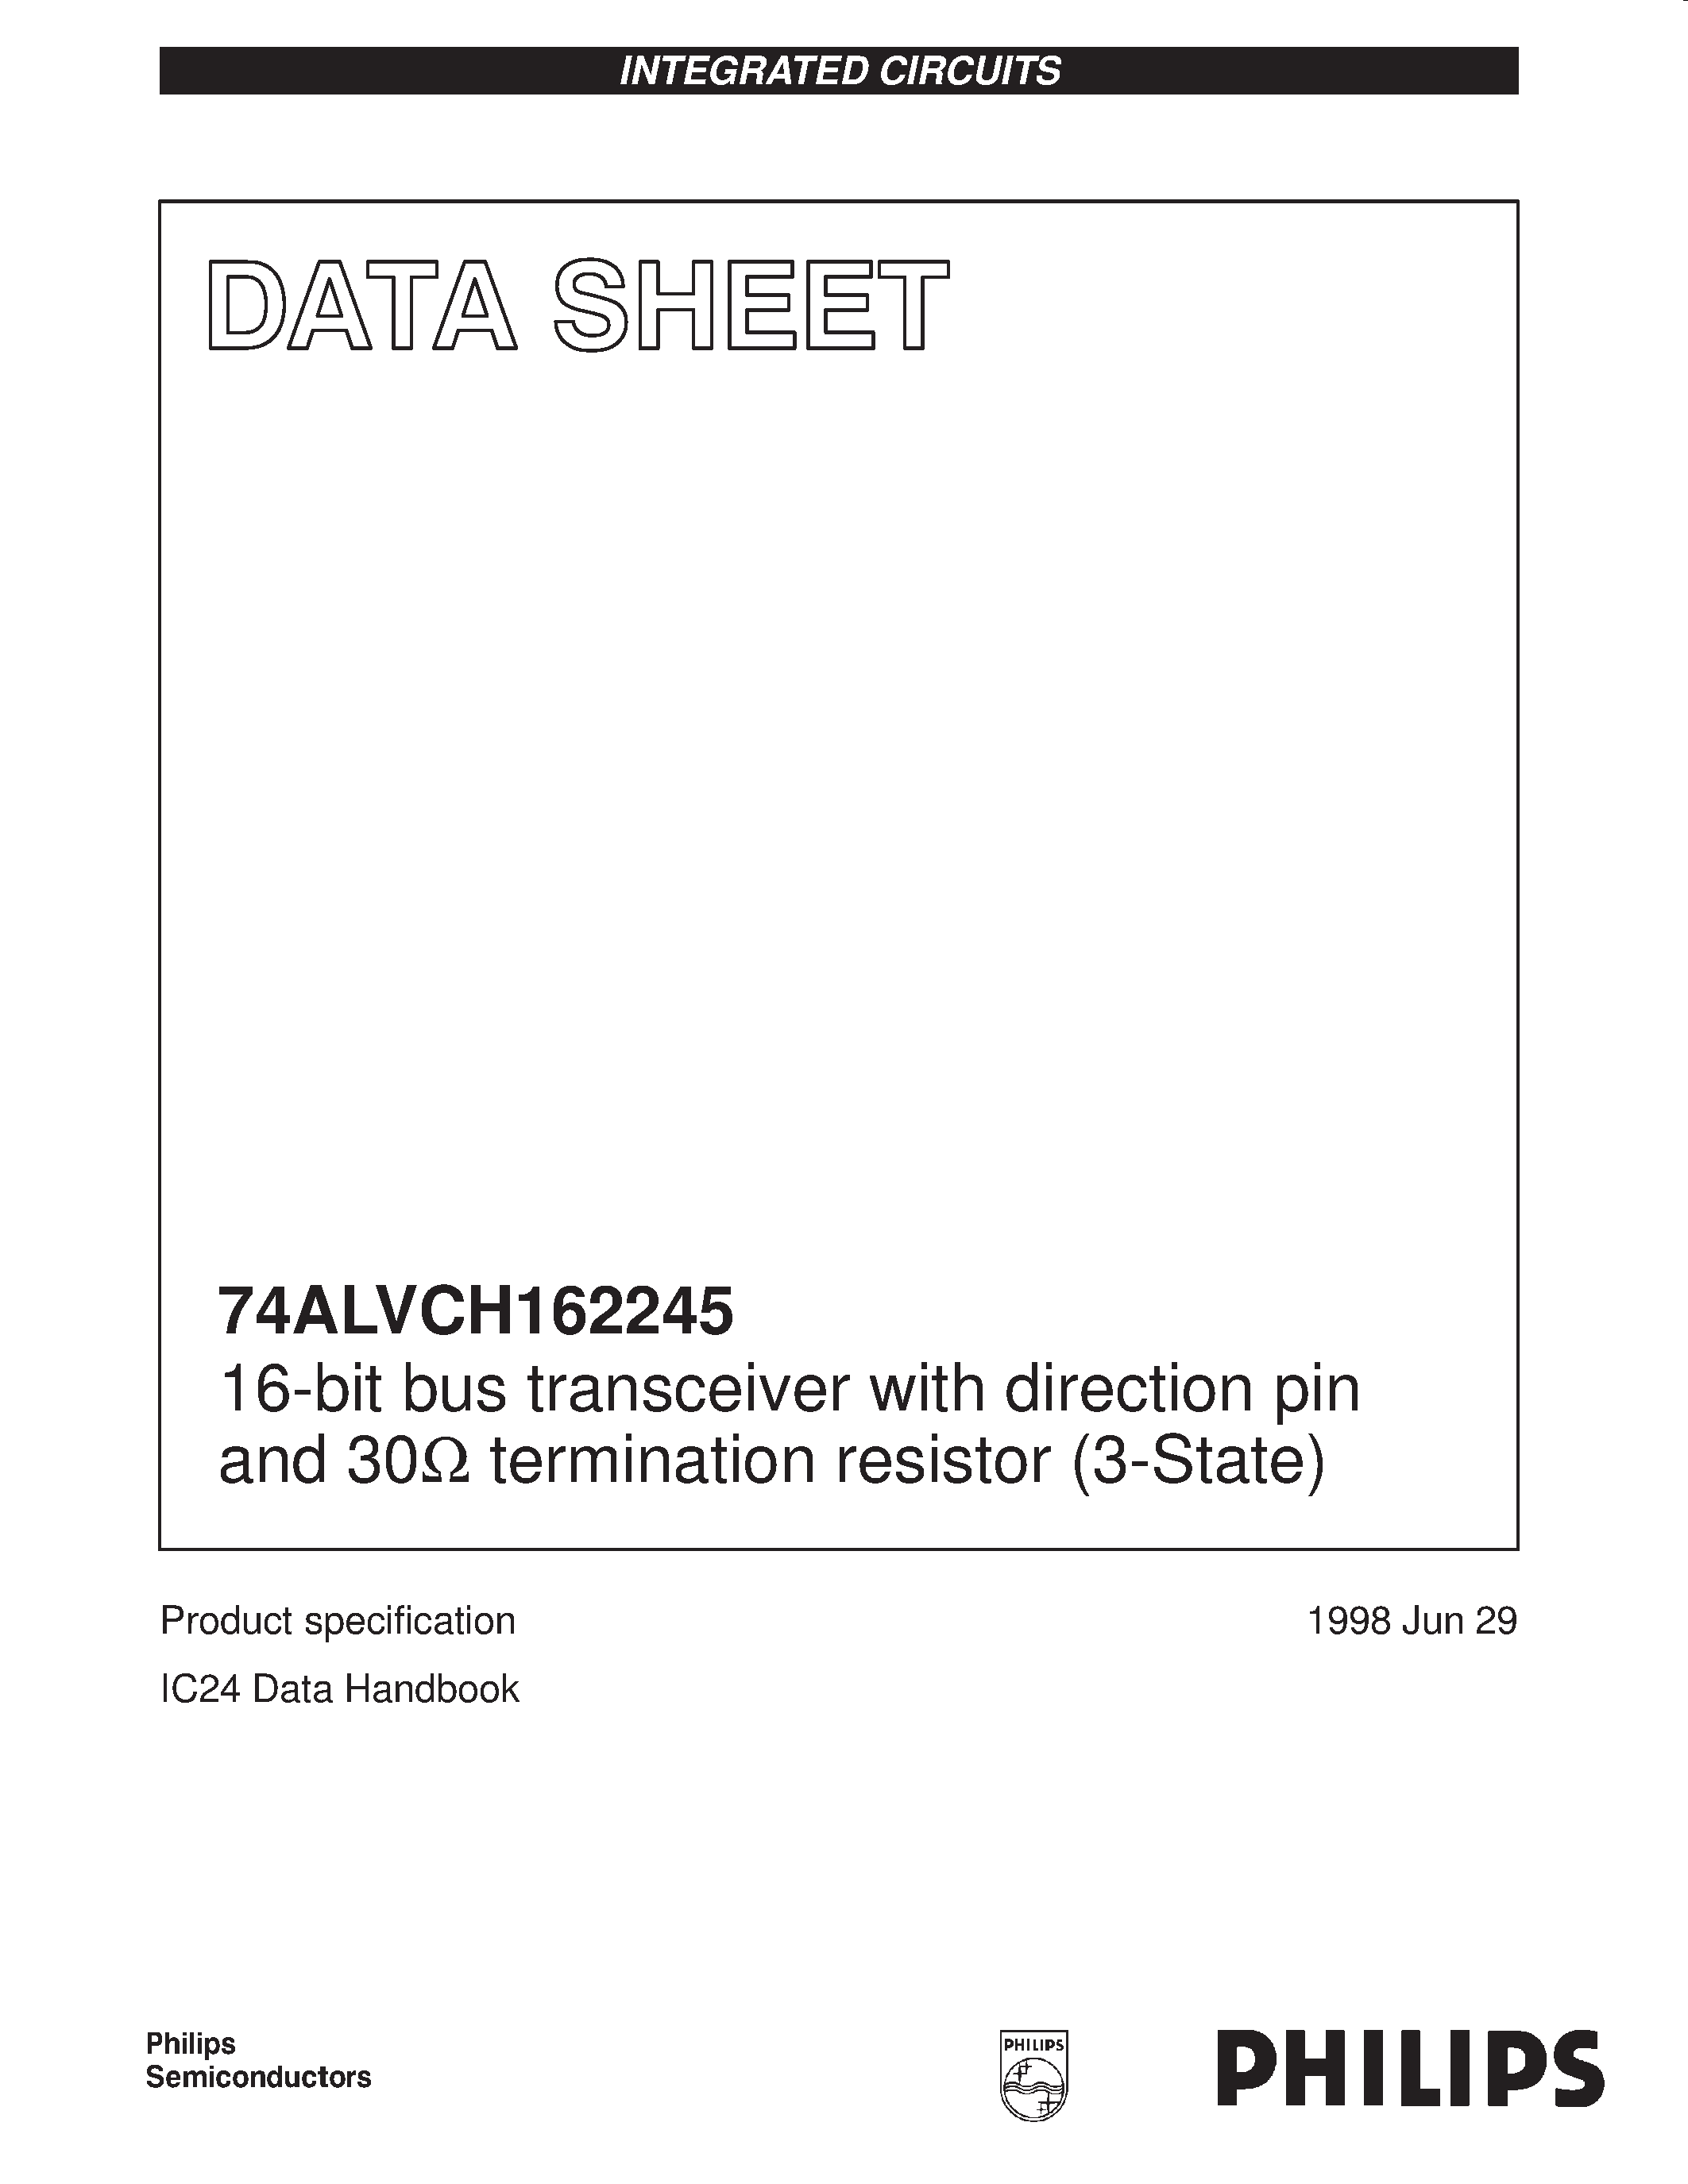 Даташит 74ALVCH162245DGG-16-bit bus transceiver with direction pin and 30ohm termination resistor 3-State страница 1